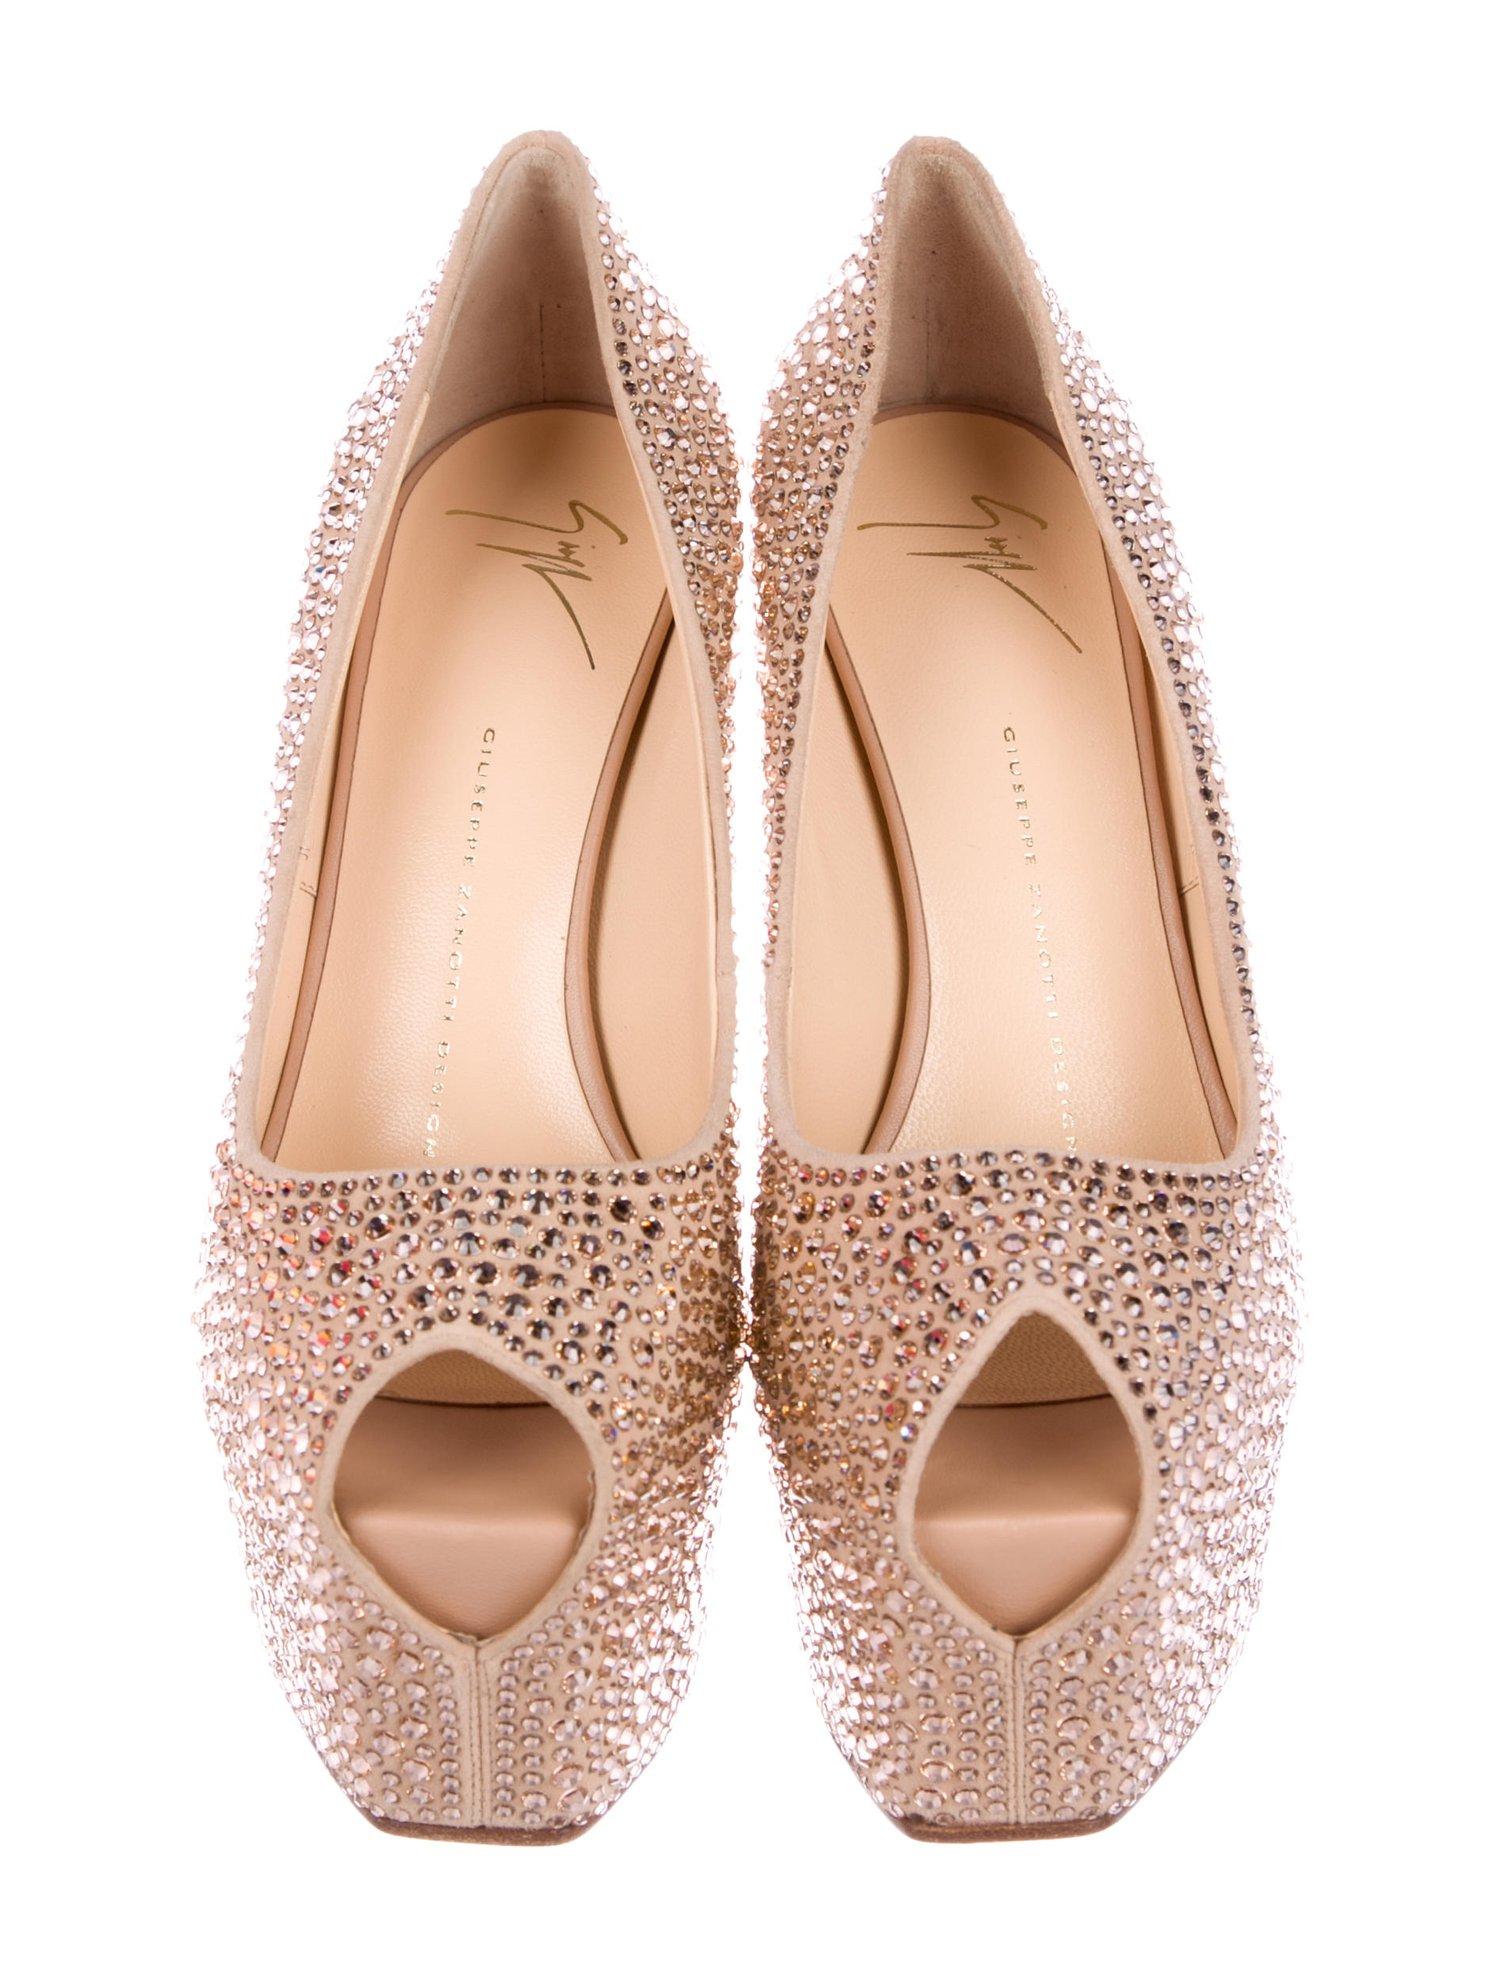 New Giuseppe Zanotti  Rhinestone-Embellished Nude Hidden Platform Peep-Toe Pumps
Designer size 38.5
Nude color pumps in gold tone rhinestone-embellished suede.
5 3/4 inches leather covered heel,  2.5 inches platform.
Peep toe, Hidden platform,